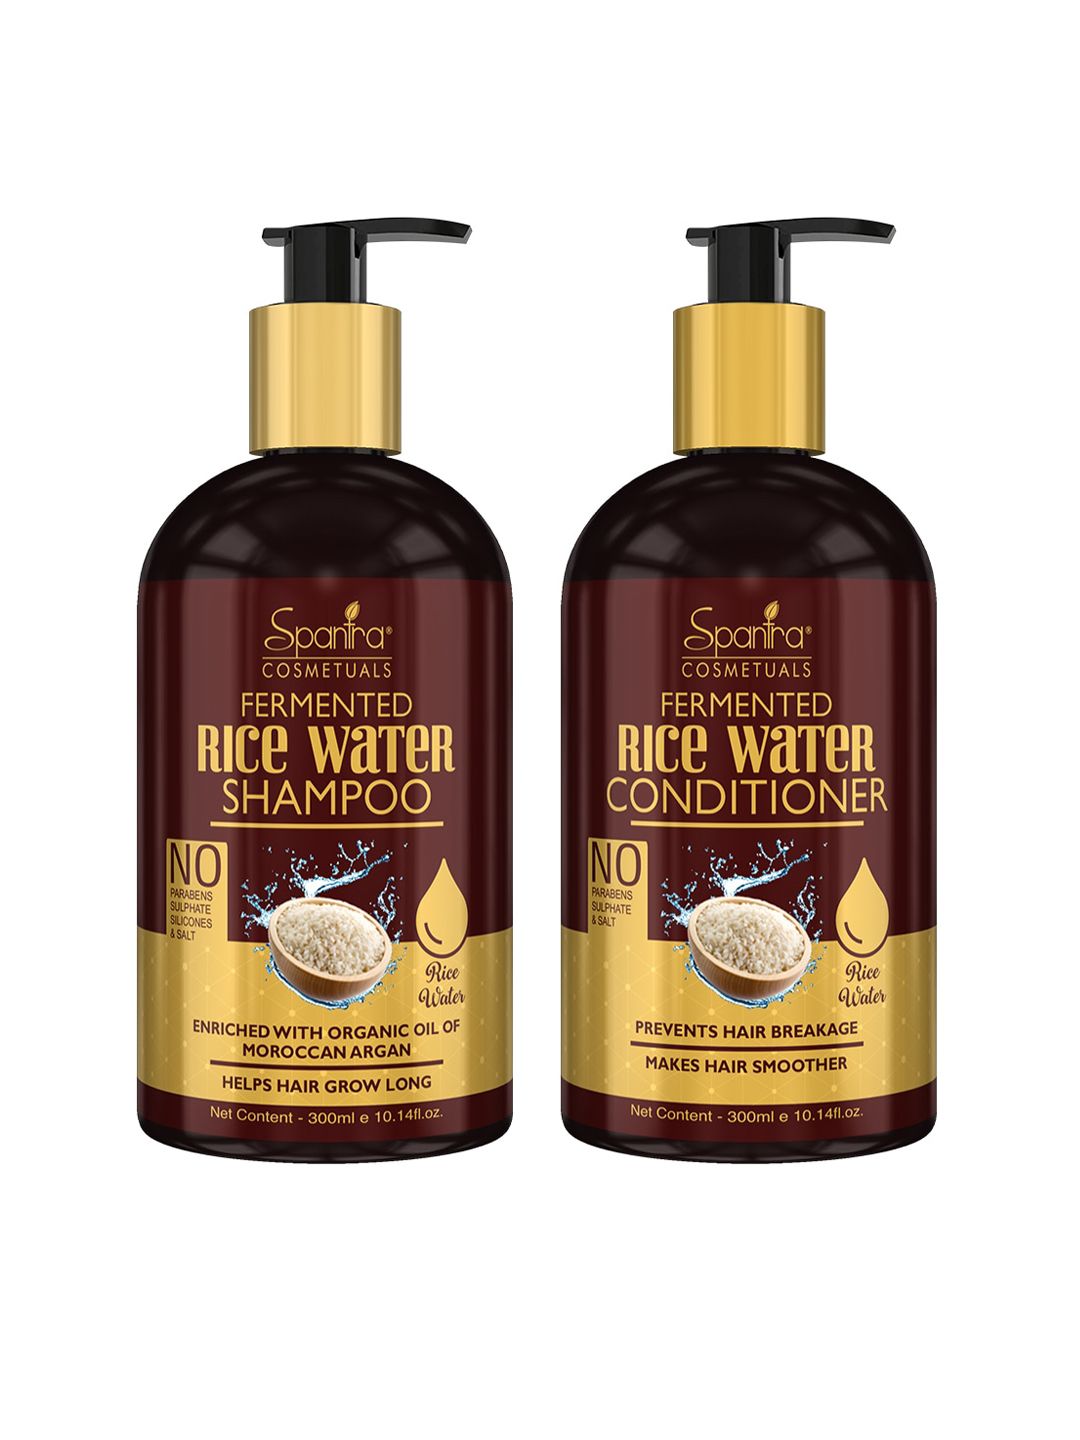 Spantra Rice Water Shampoo & Conditioner Combo Price in India